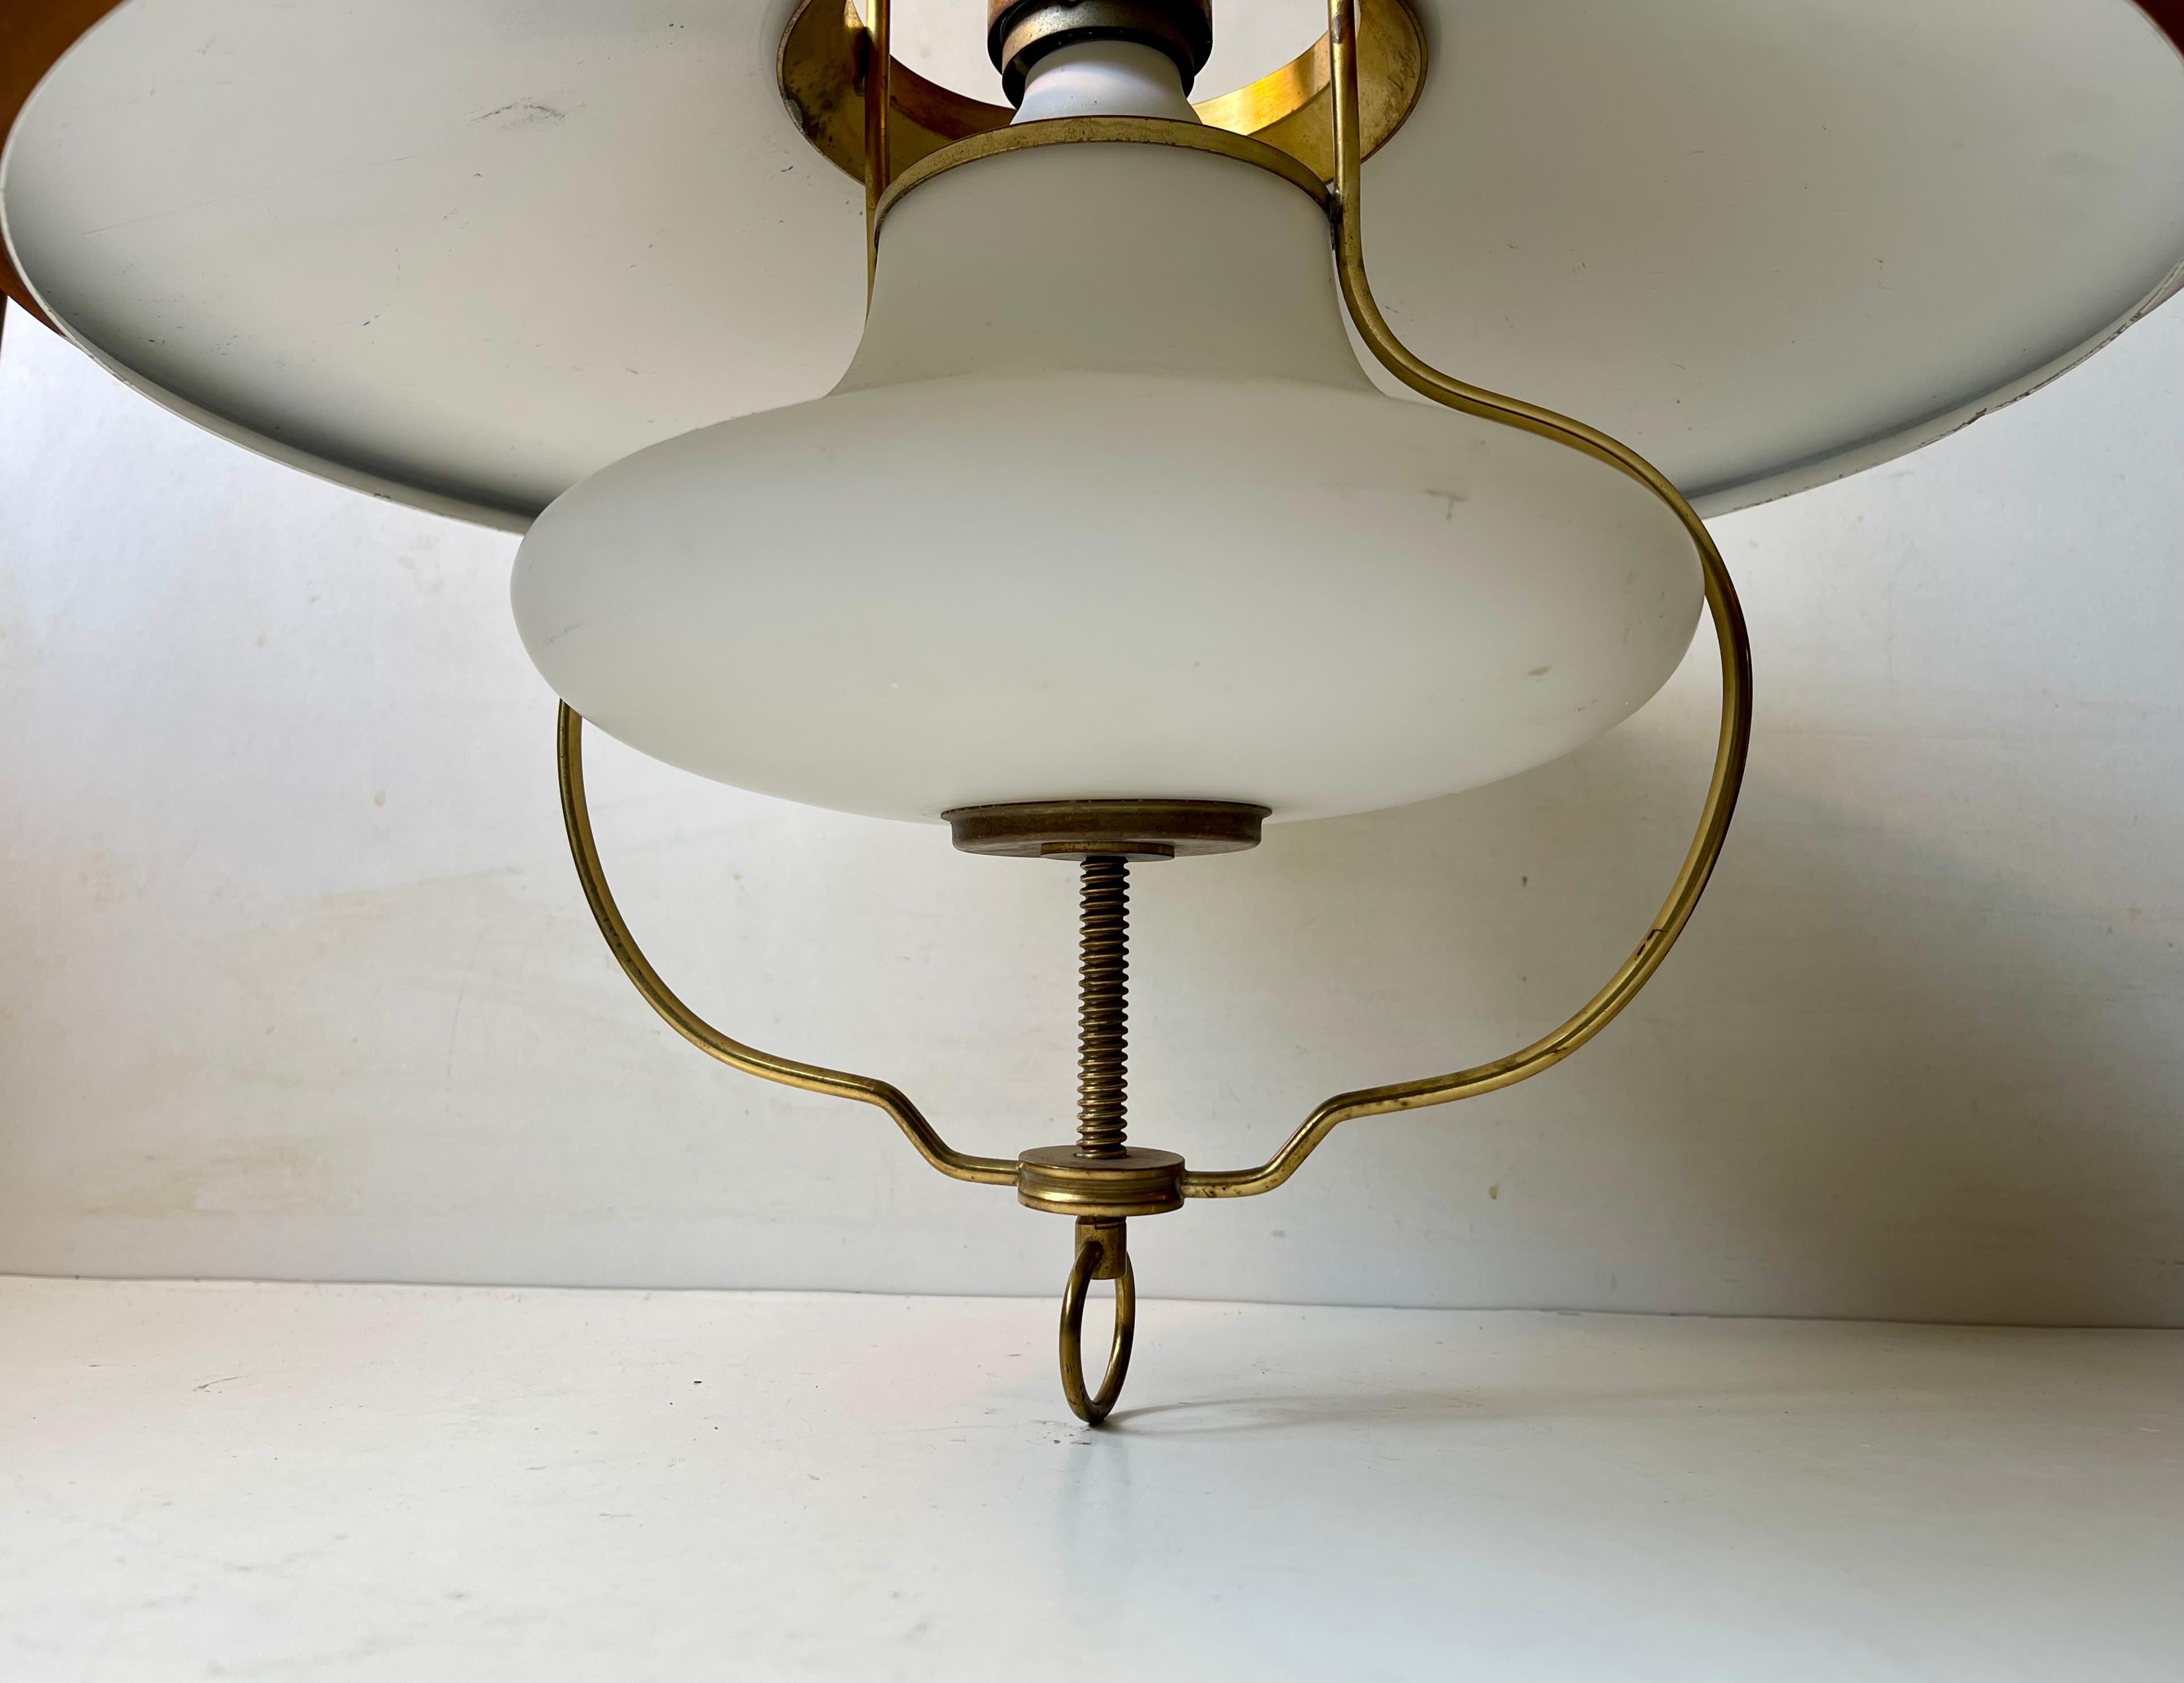 A rare internally adjustable nautical hanging lamp in solid brass, white opaline glass and copper alloy outer shade. You can adjust the spreading and intensity of the light via the stylish tomb-screw at the bottom. It was made by Lyfa in Denmark